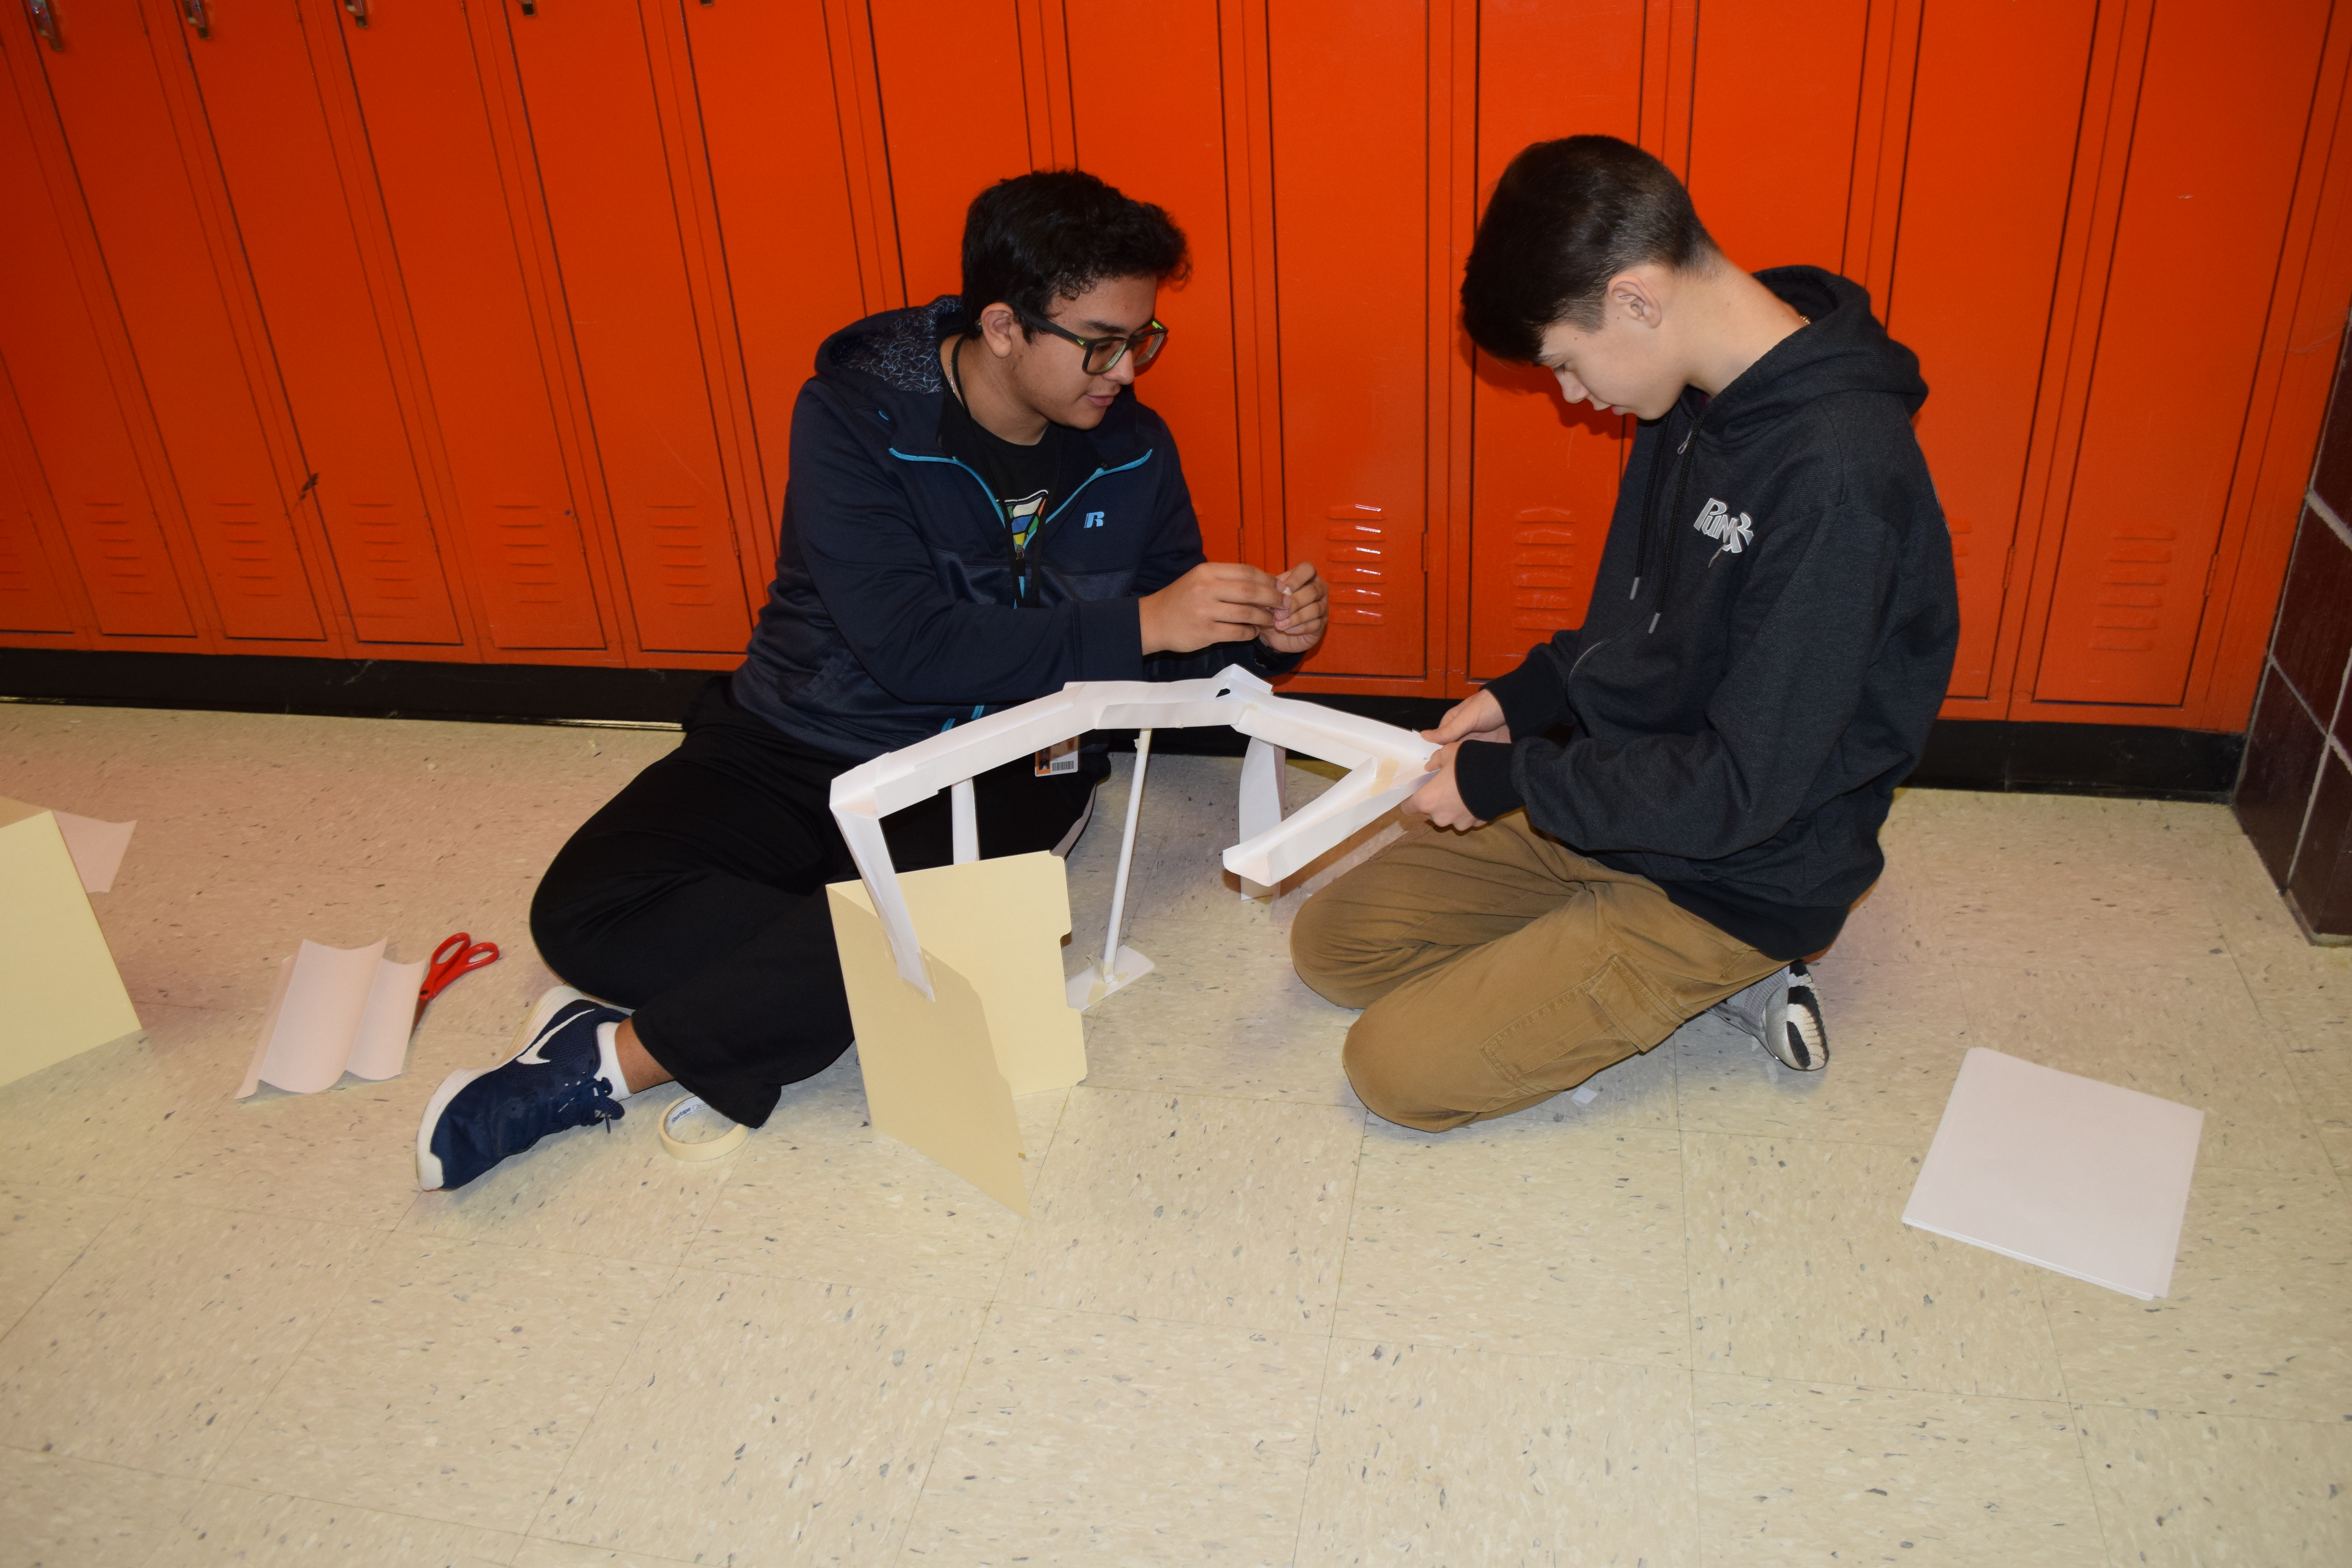 Engineering Technology students working on a project together on the floor